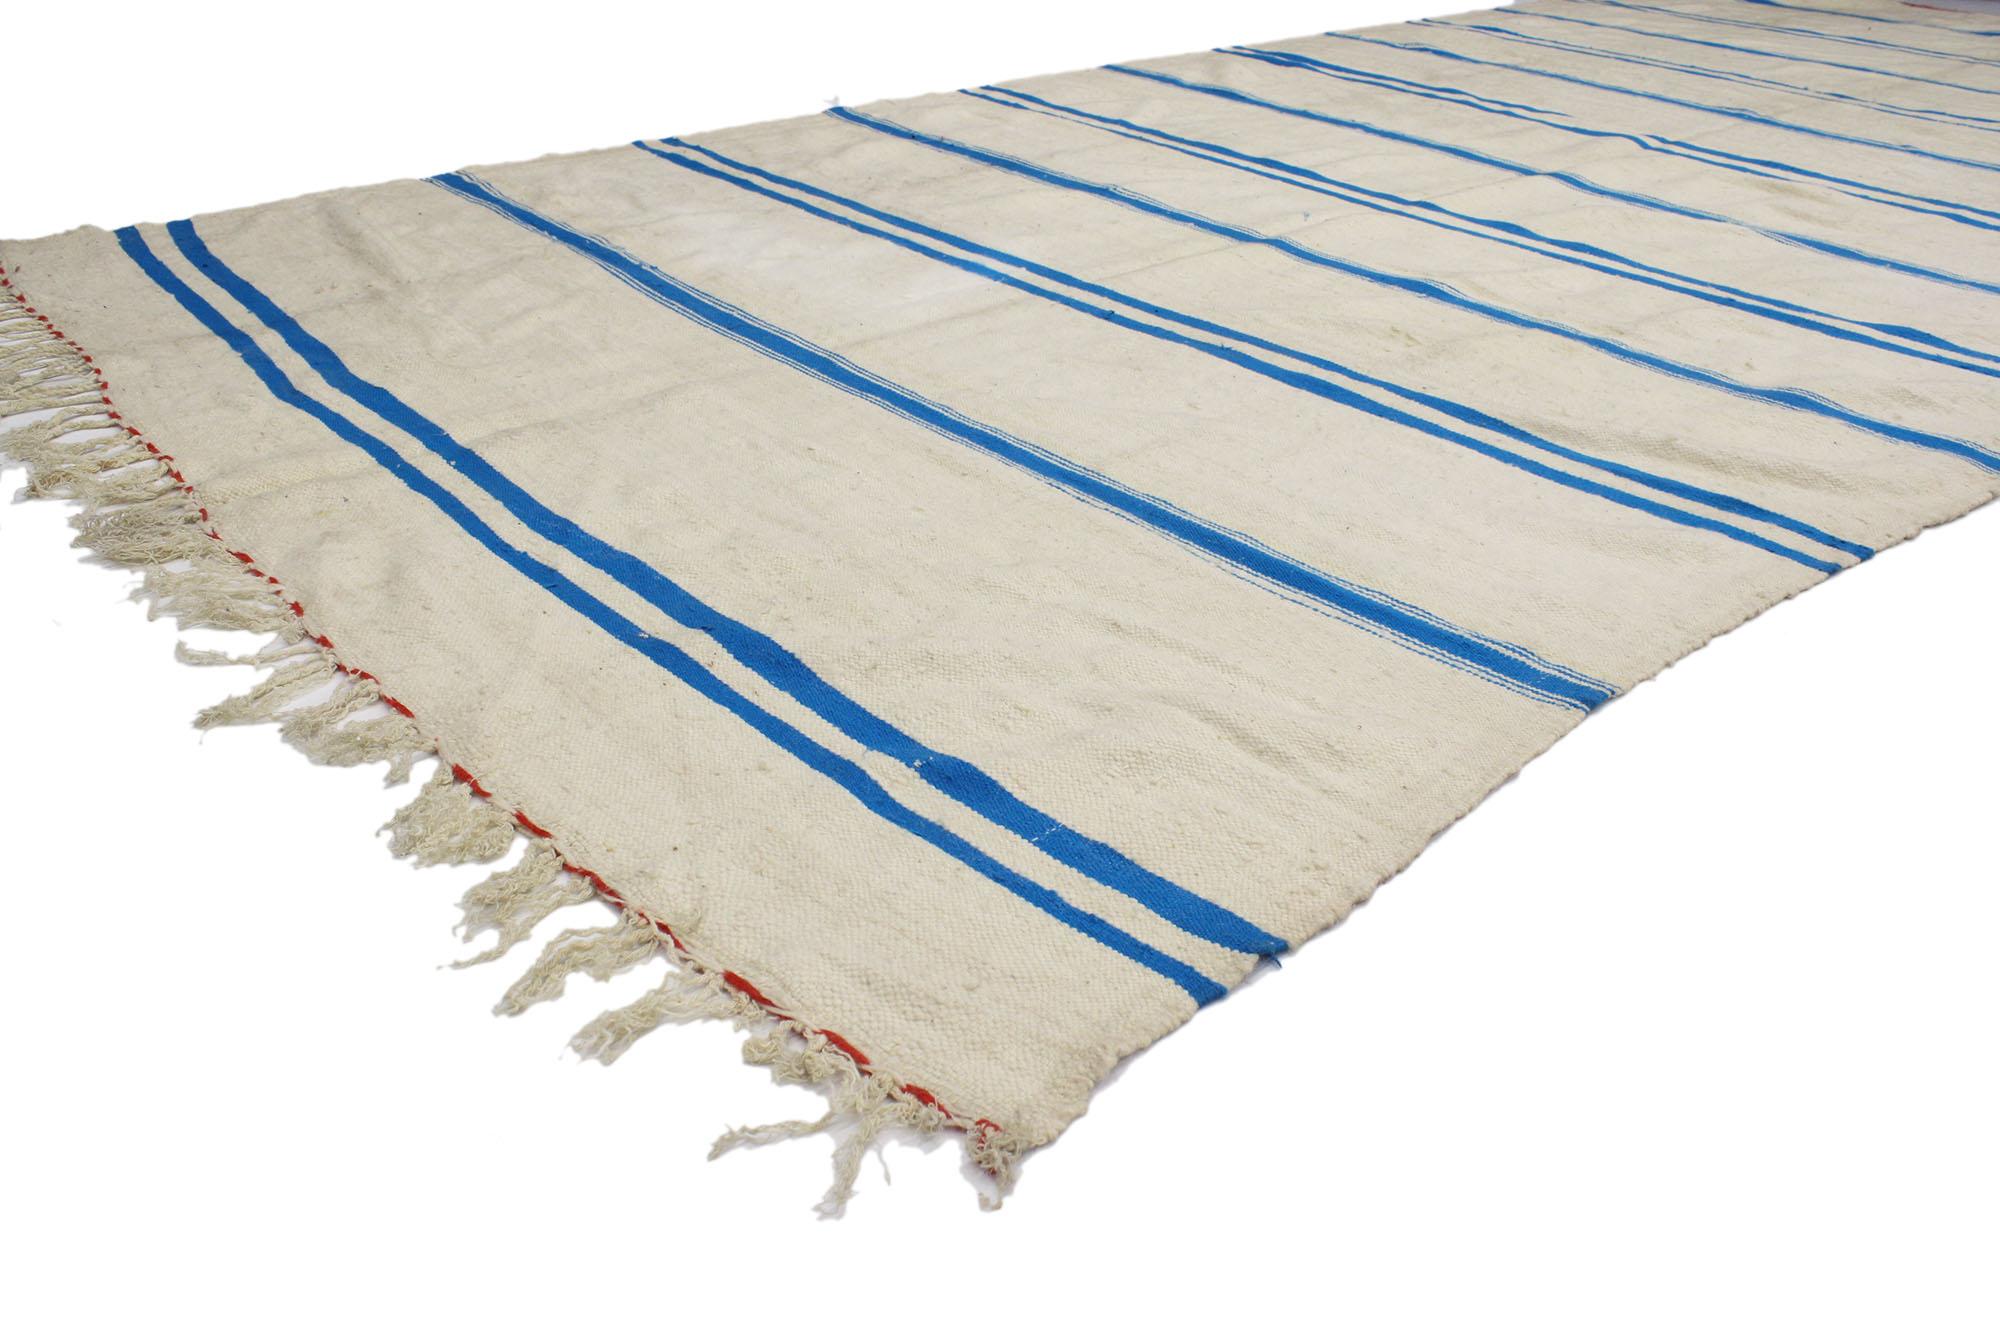 20552 Vintage Berber Moroccan Striped Kilim Rug with Relaxed Coastal Style 05'10 x 12’02. With its simplicity, relaxed coastal style, bohemian vibes, this hand-woven wool vintage Berber Moroccan kilim rug is a captivating vision of woven beauty. The